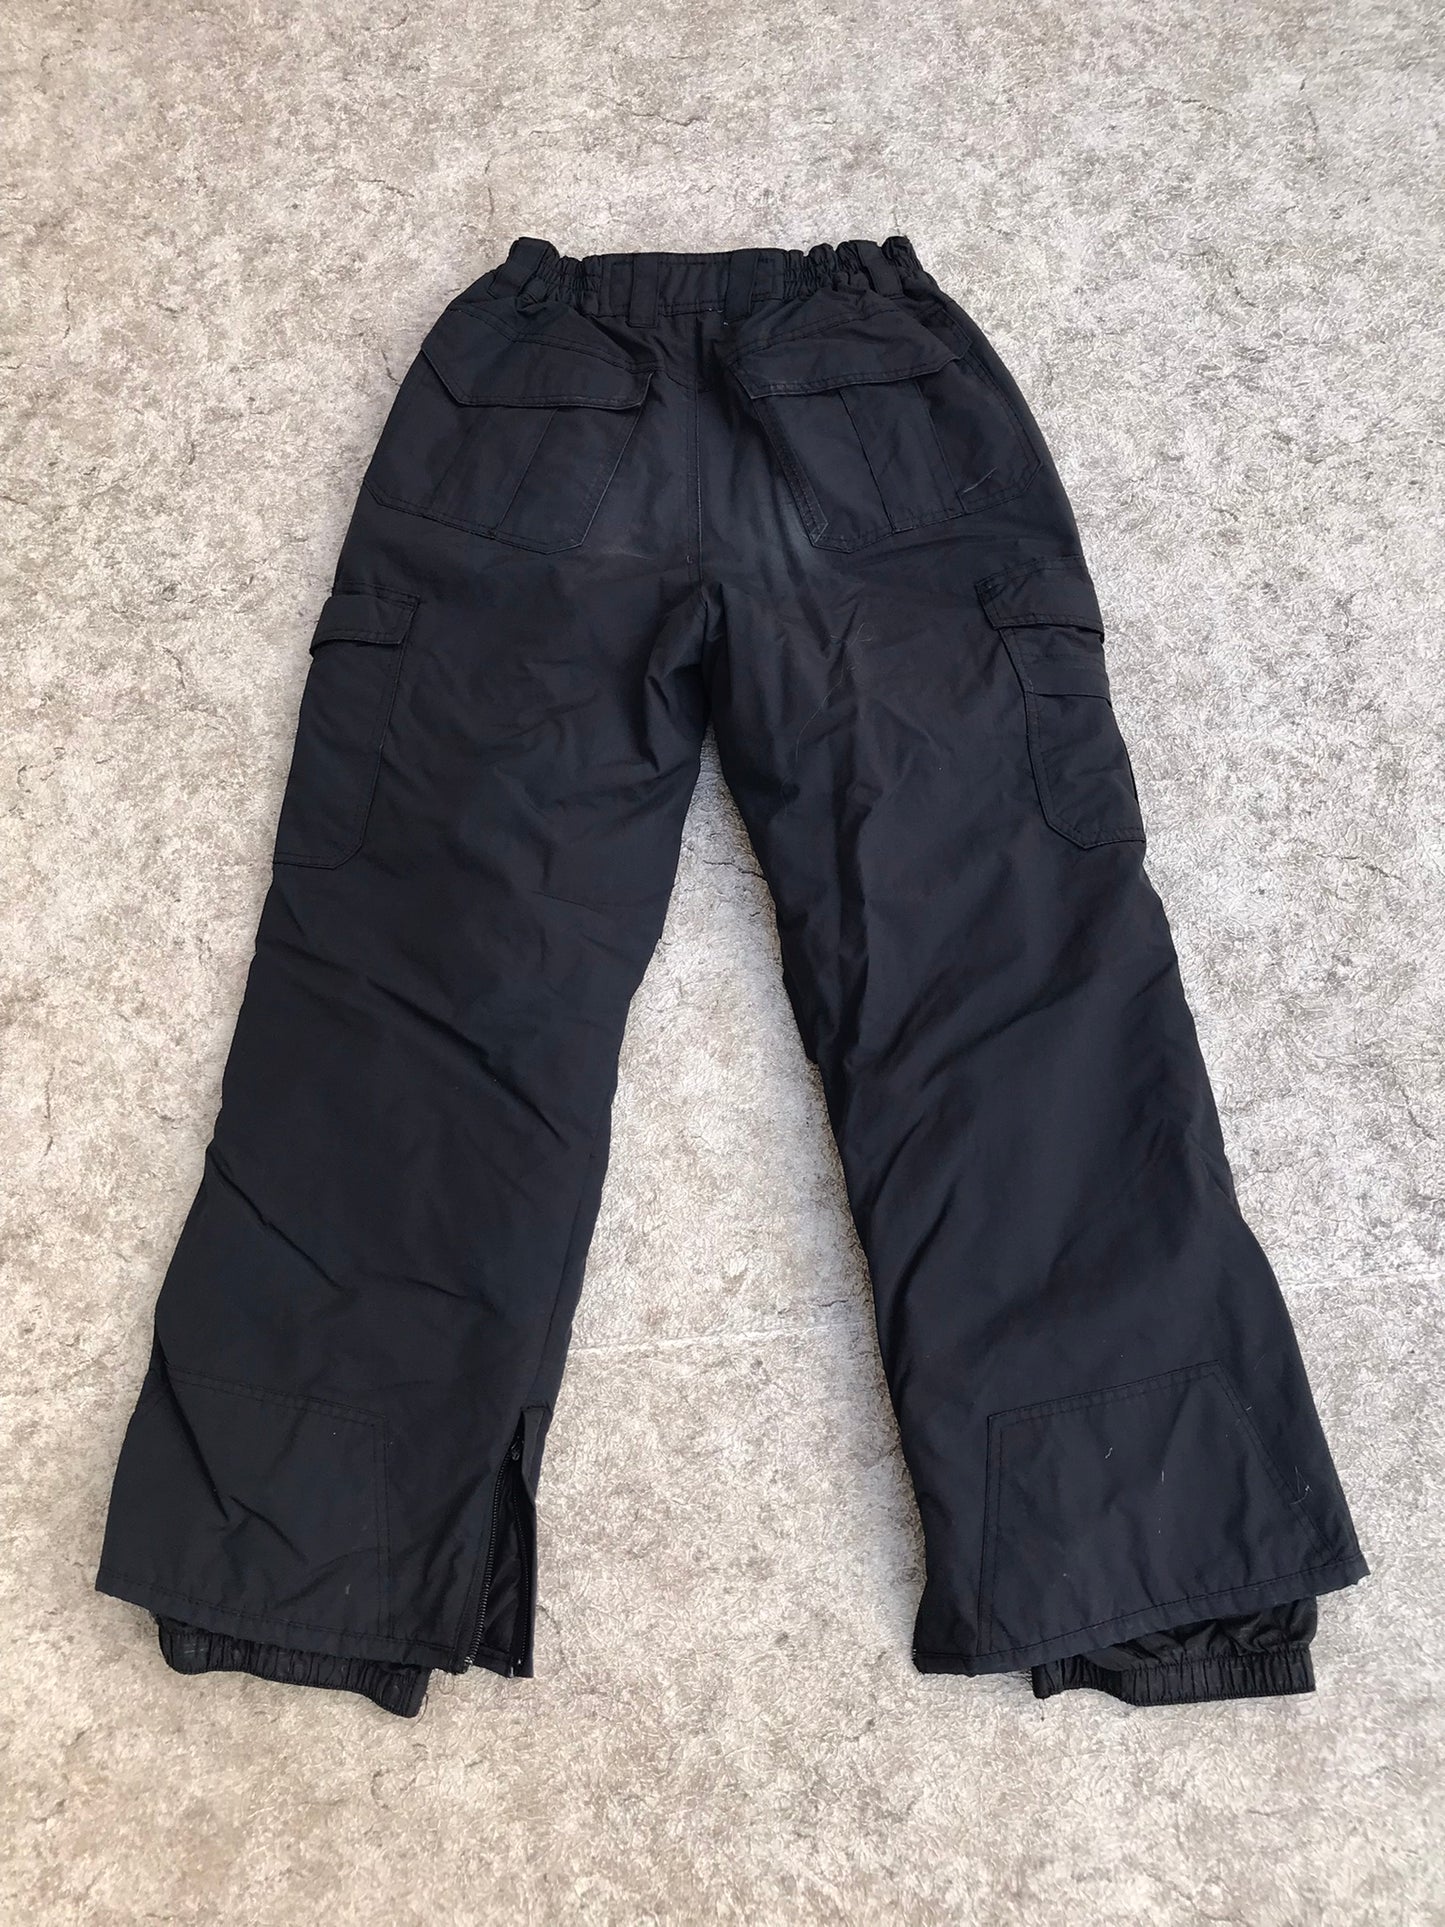 Snow Pants Child Size 12 Large Youth Ripzone Black Snowboarding Minor Marks